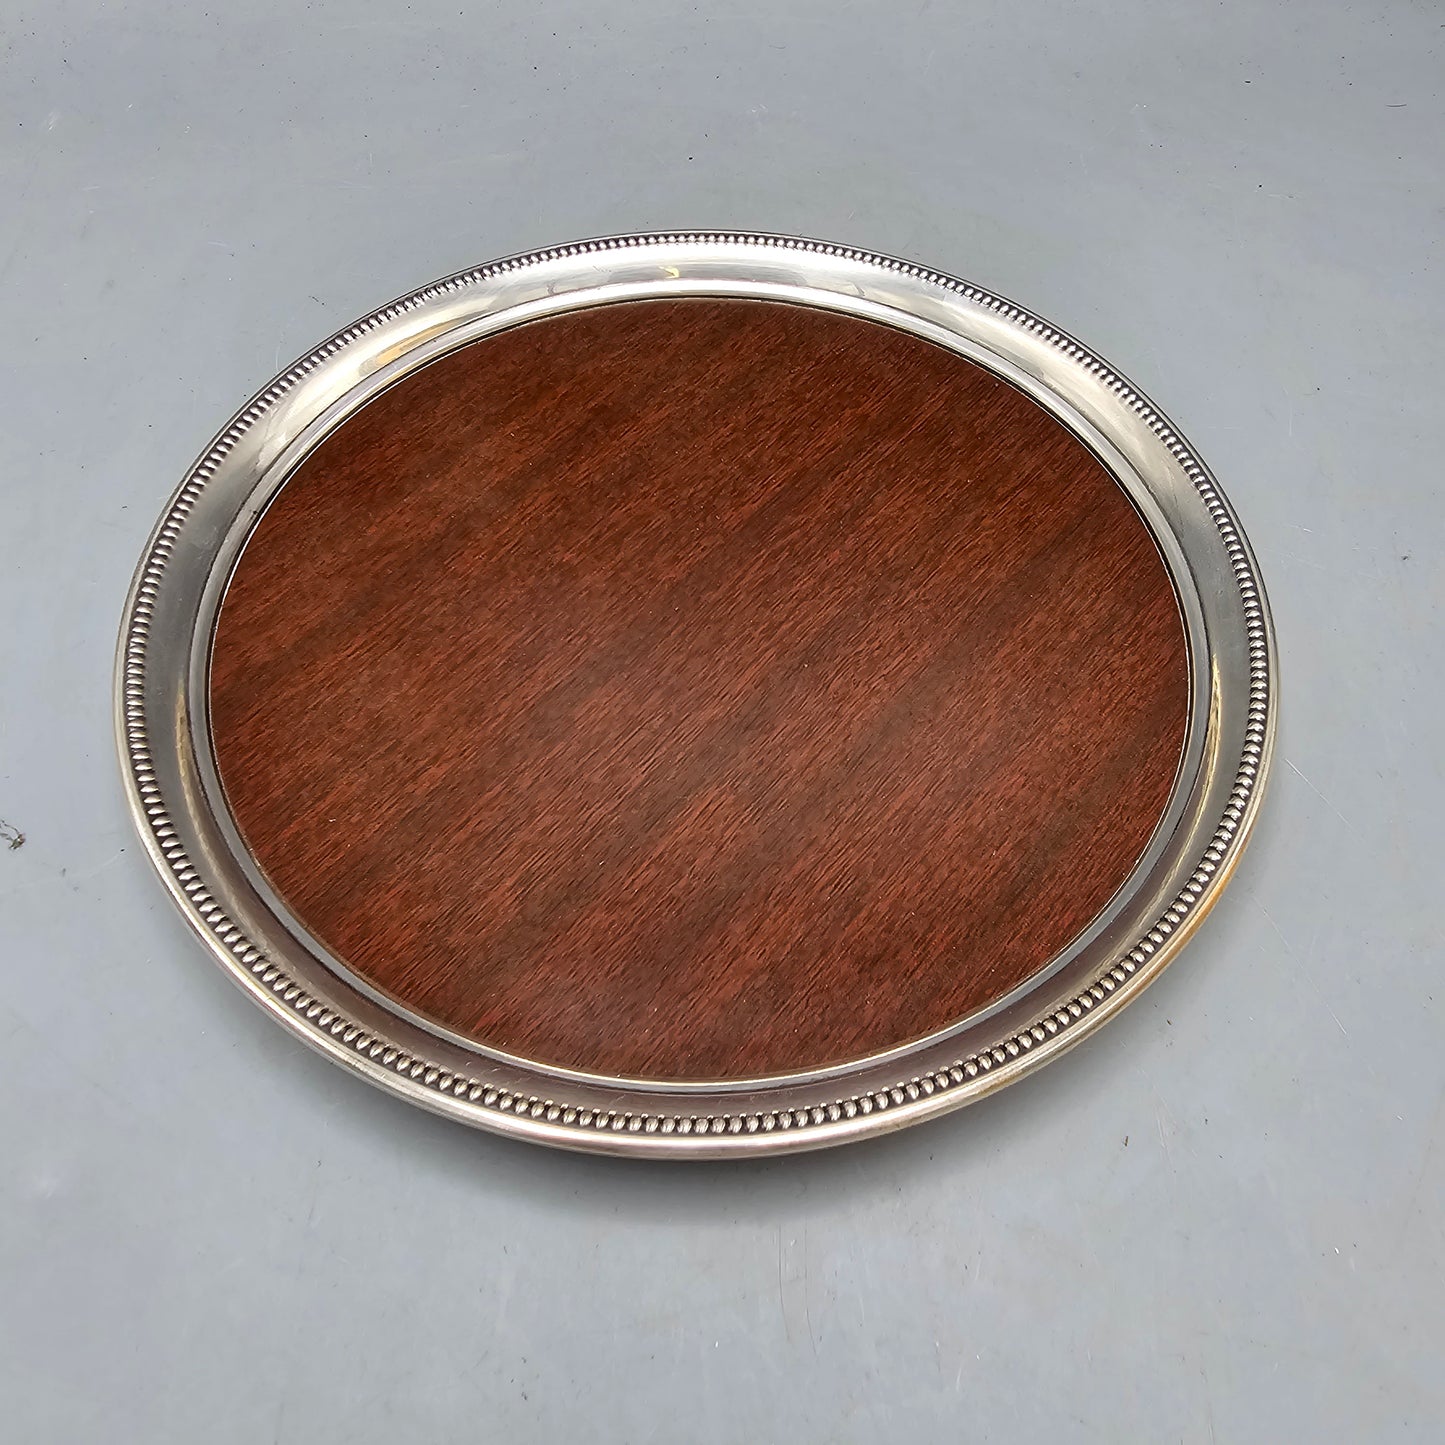 Vintage Sterling Silver Round Server Tray with Laminate Wood Grain Interior